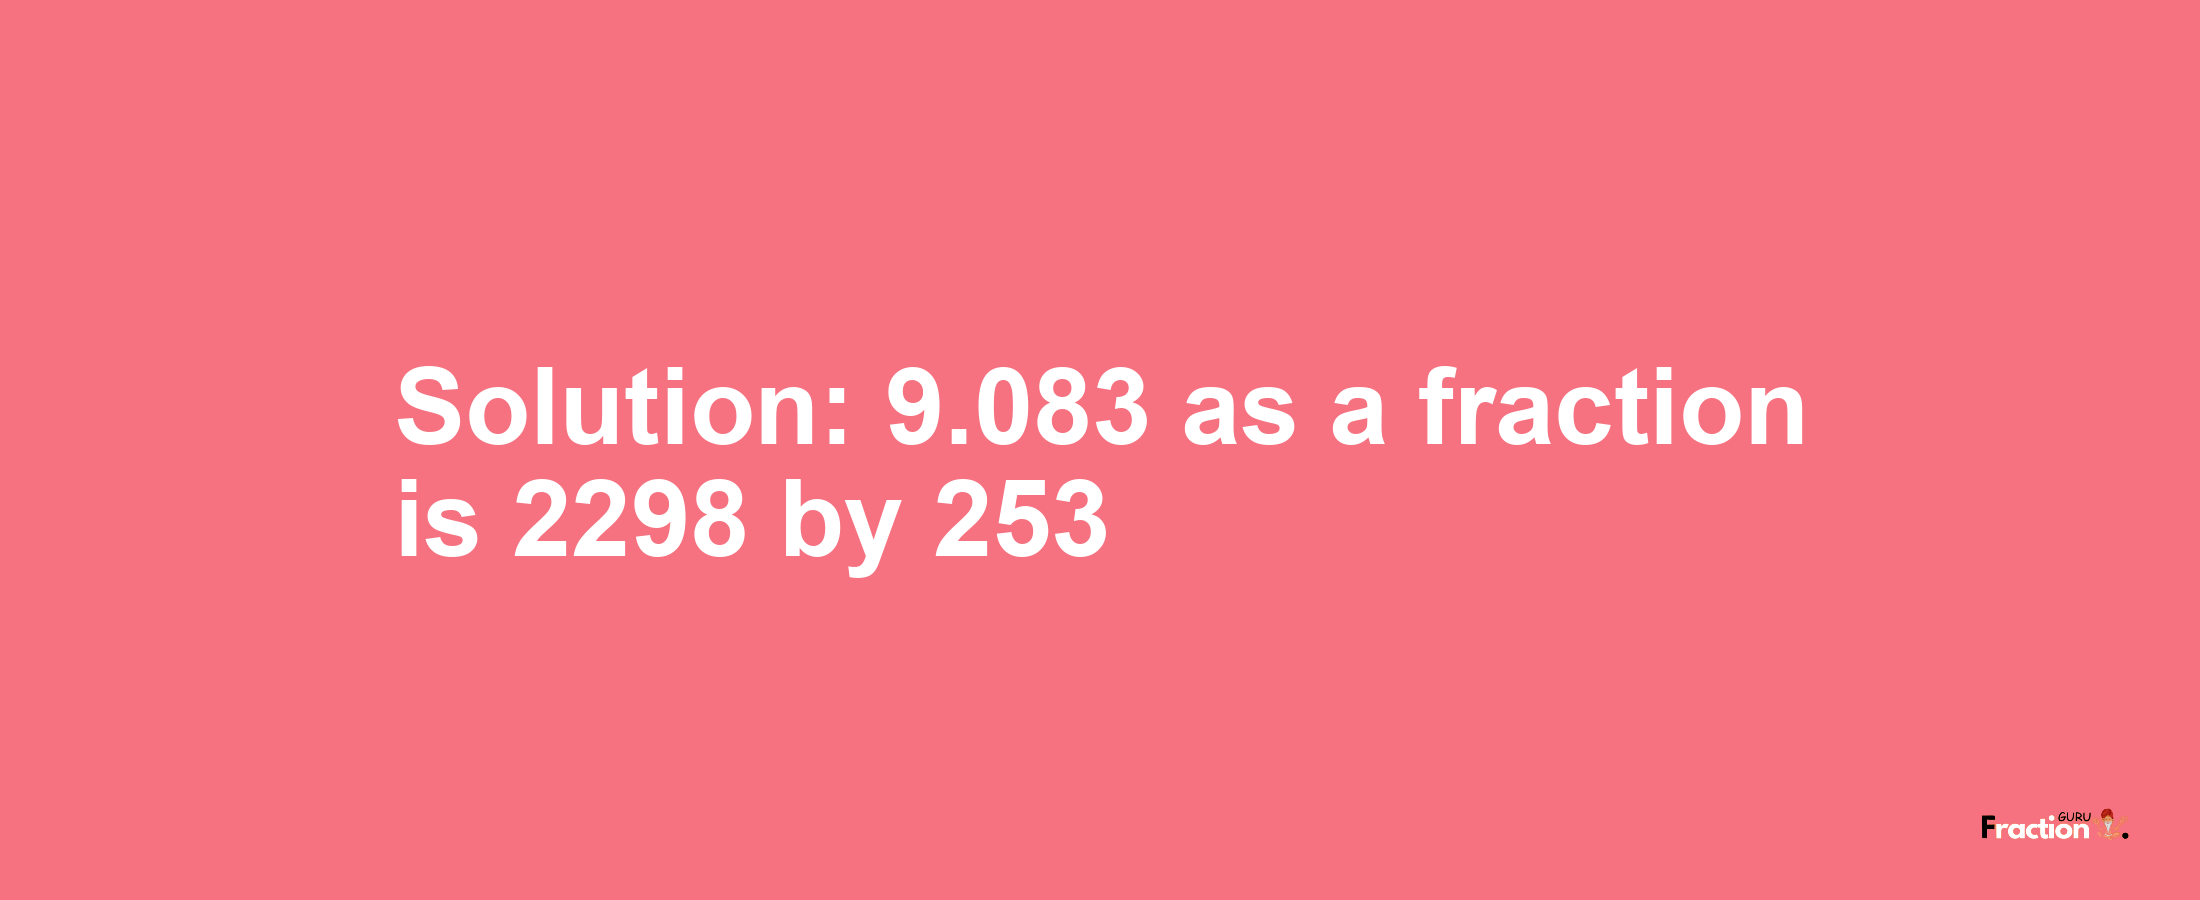 Solution:9.083 as a fraction is 2298/253